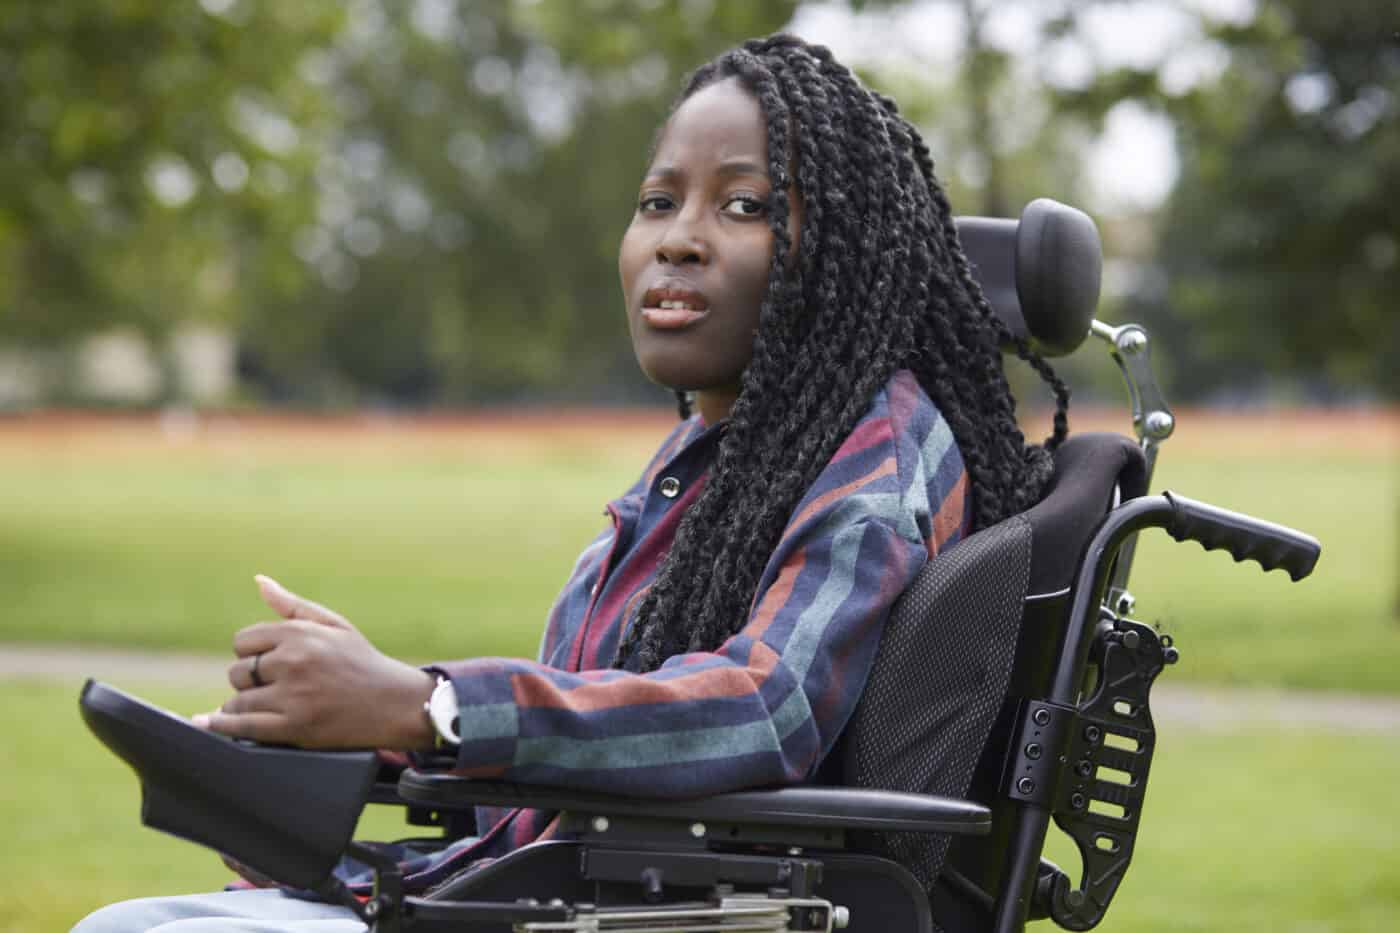 Jacqui is a black woman with black and slightly grey waist-length twists, She is wearing a vertically striped shirt. She is sitting in her powered wheelchair sideways facing, Jacqui staring straight into the camera with a curious look on her face. The background is greenery not in focus.